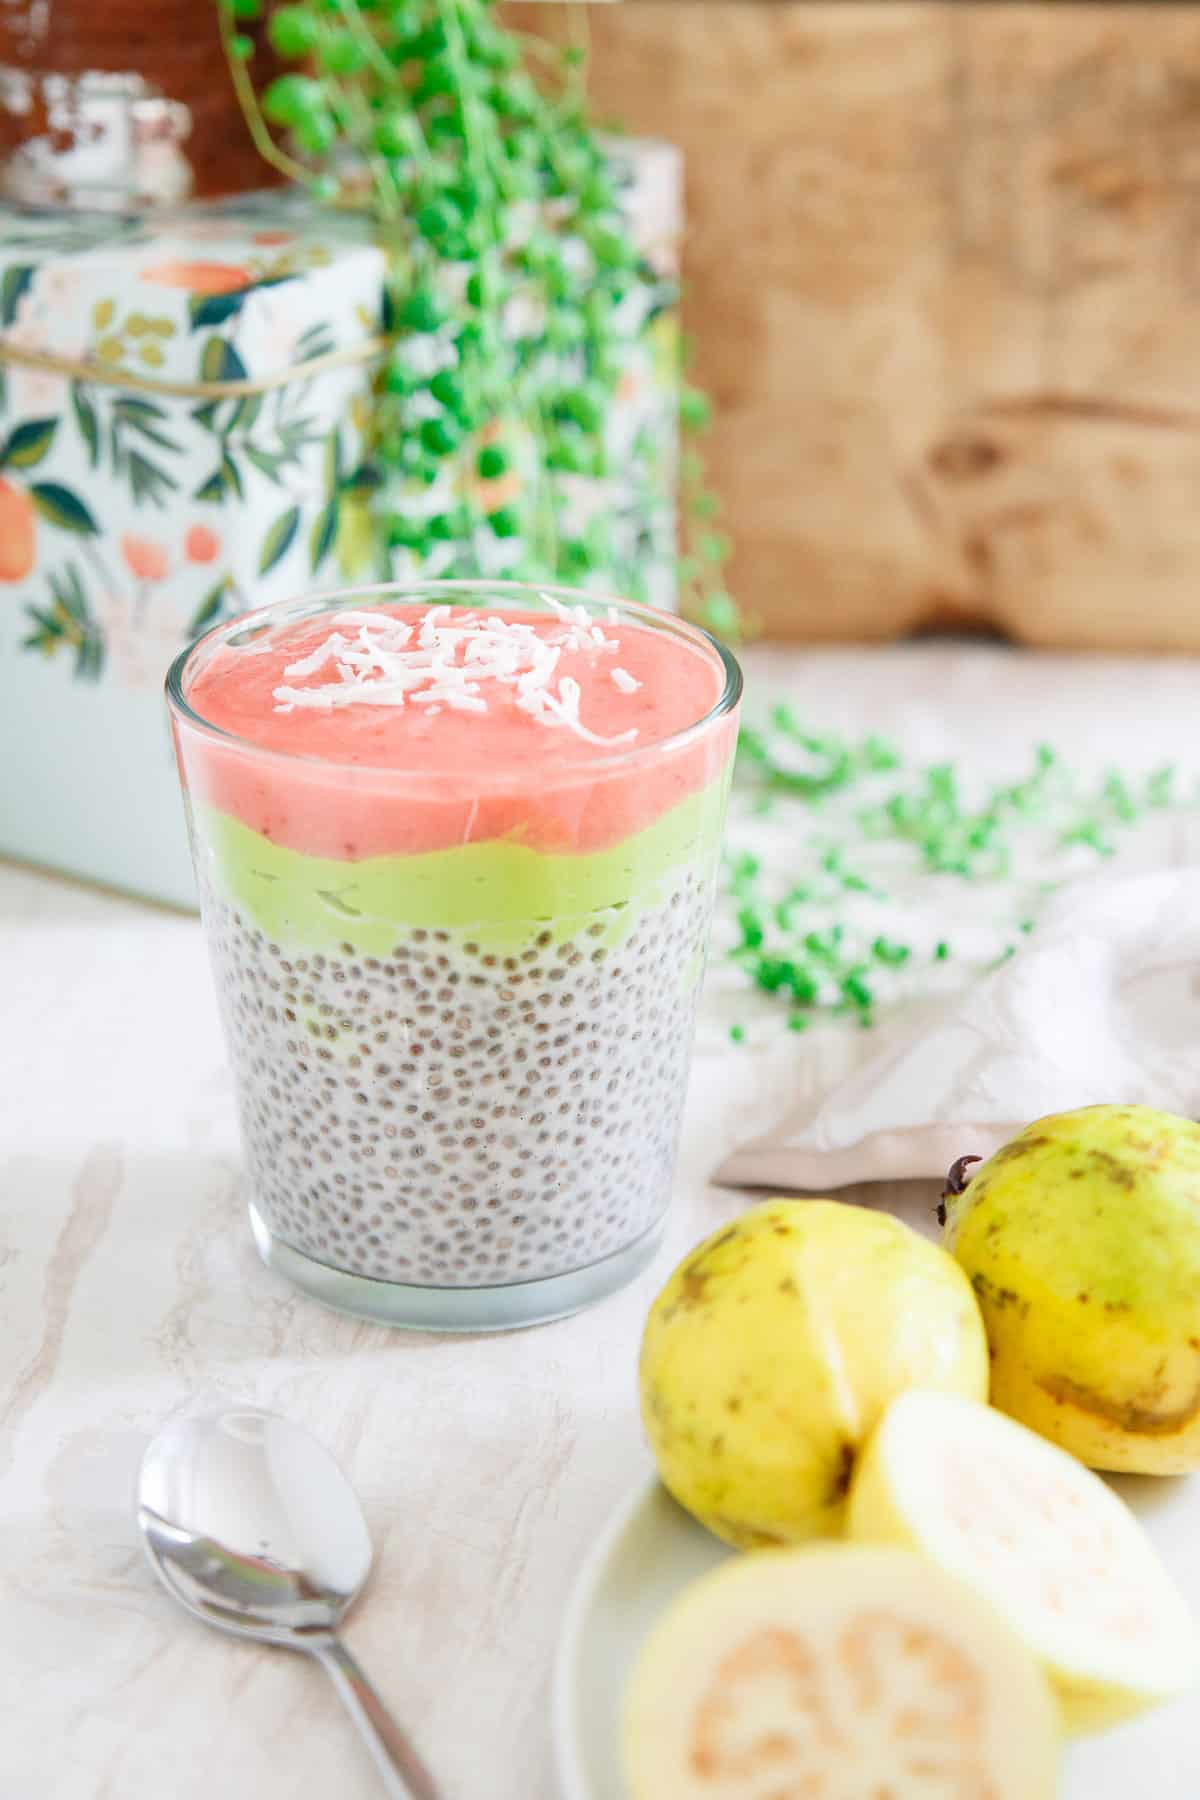 This Layered Strawberry Guava Chia Pudding is a dessert you can feel good about eating!